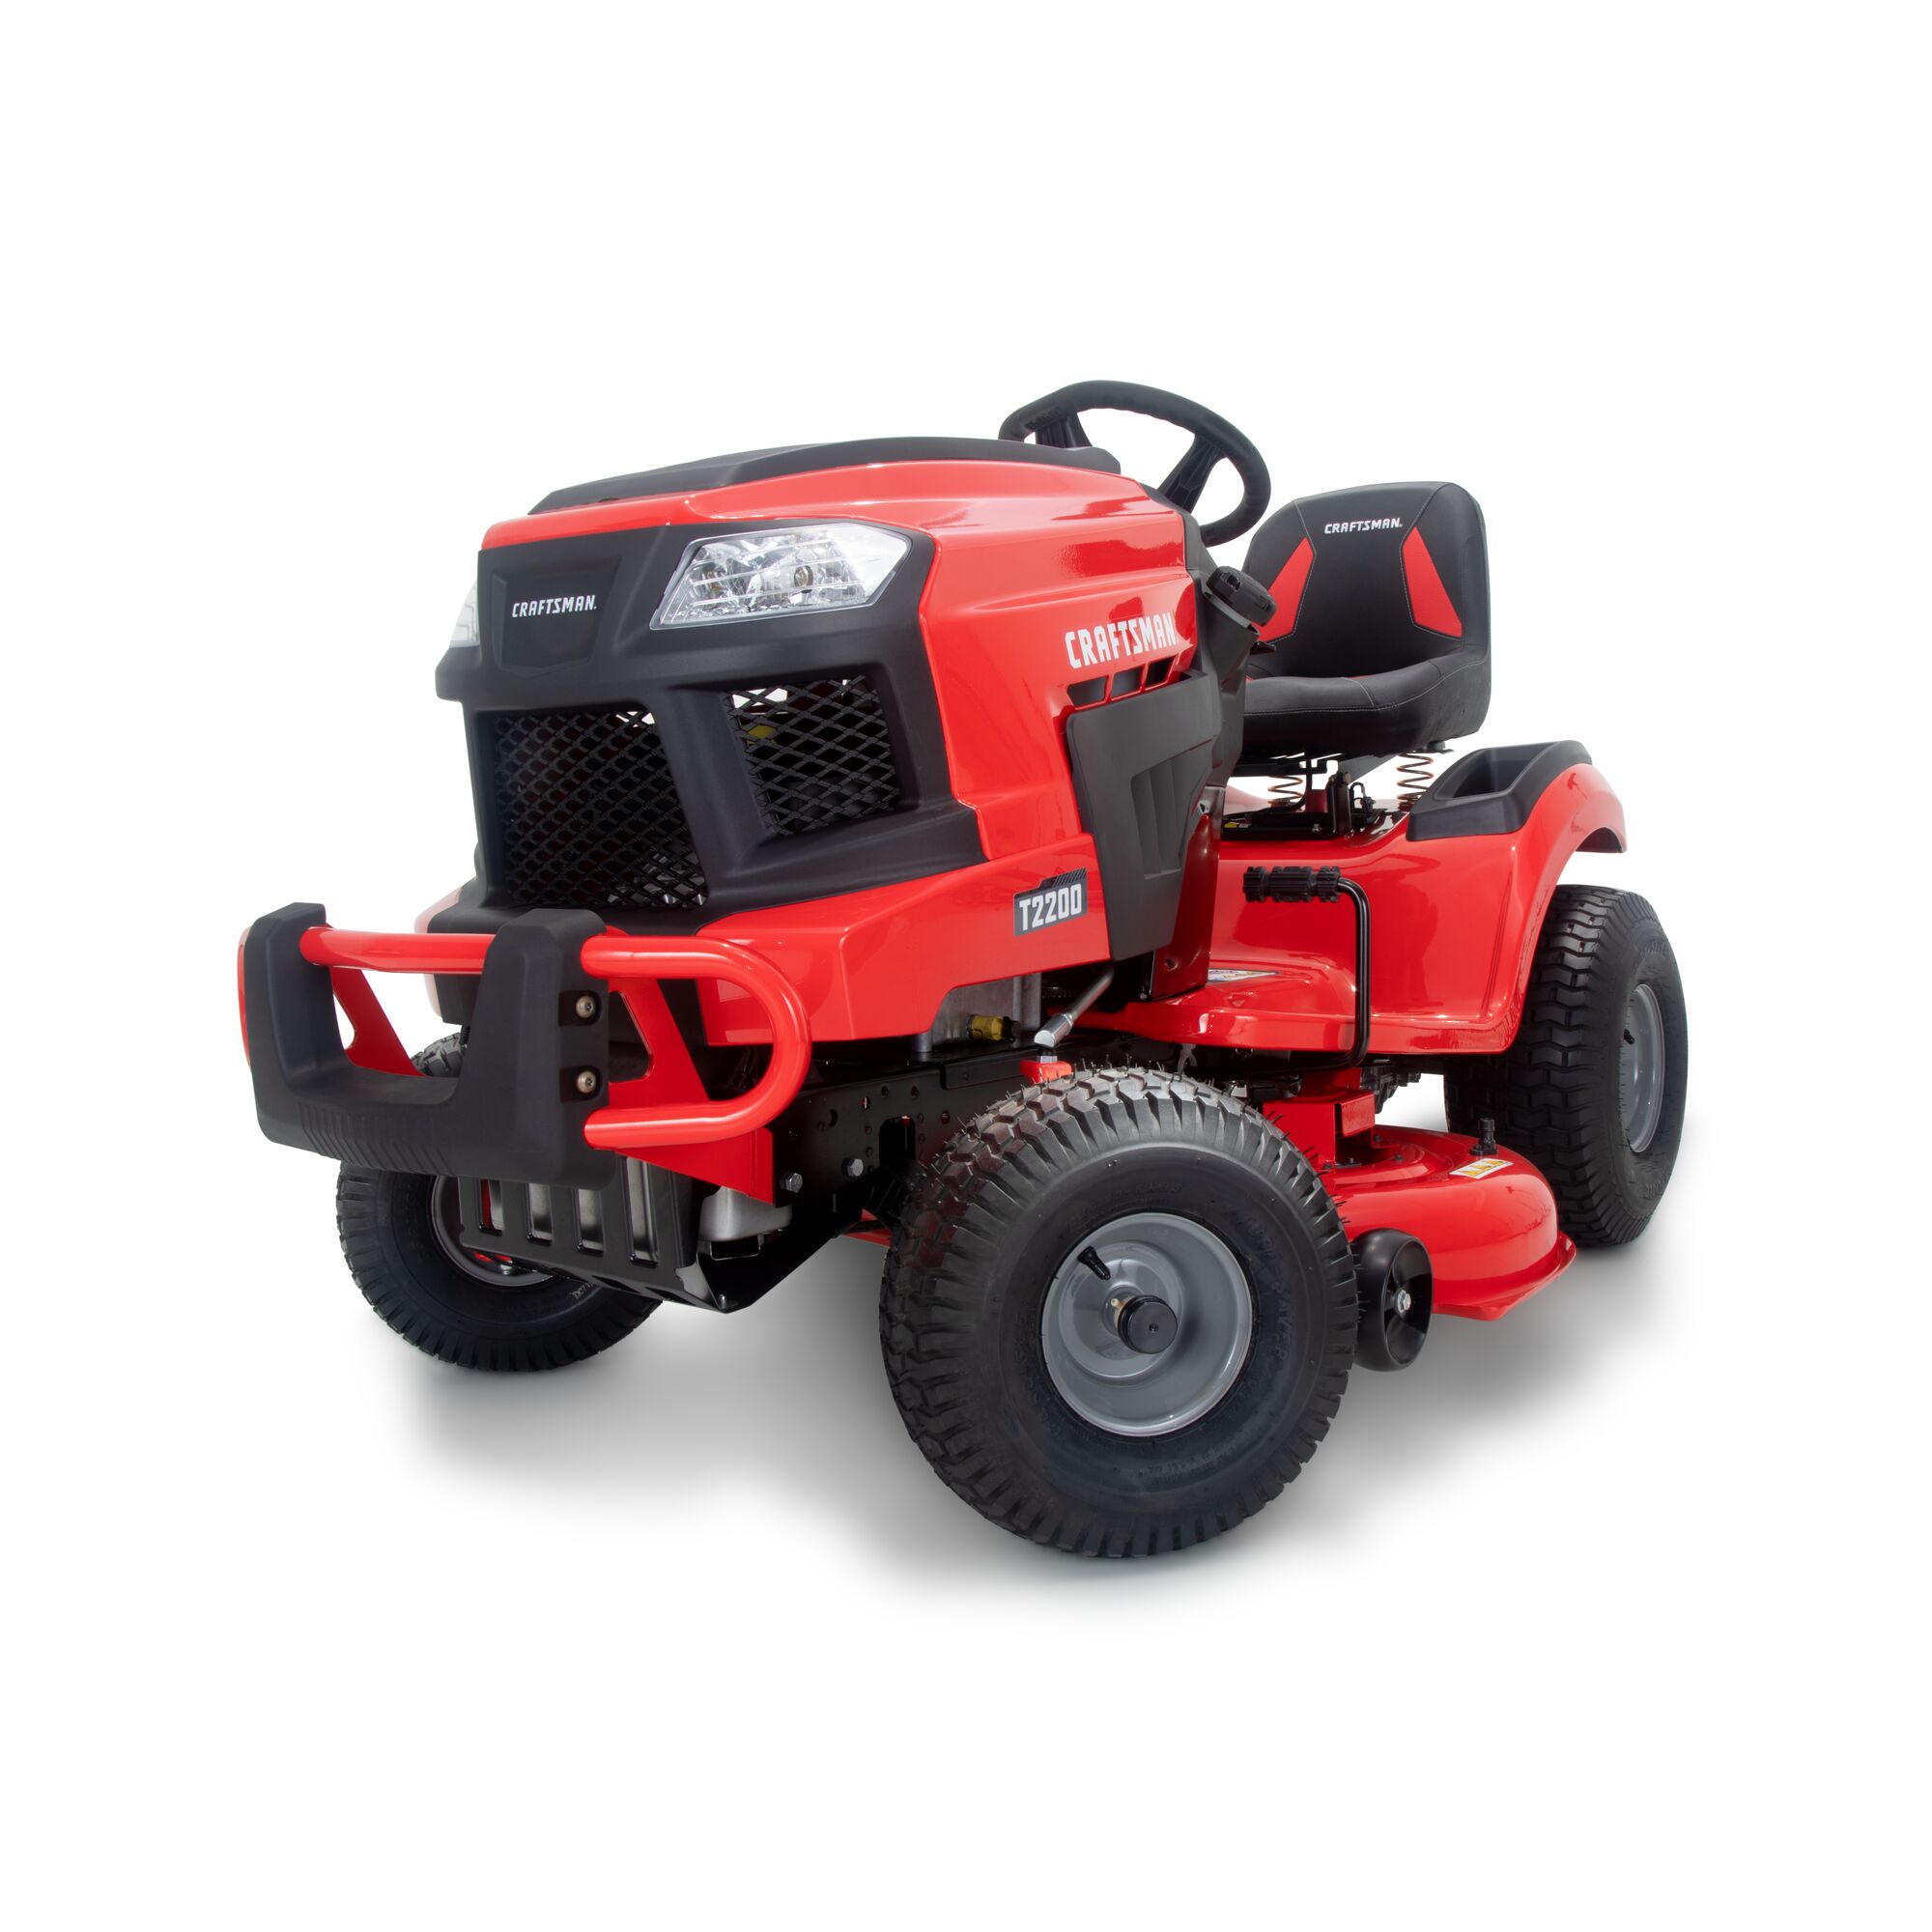 View of CRAFTSMAN Riding Mowers on white background